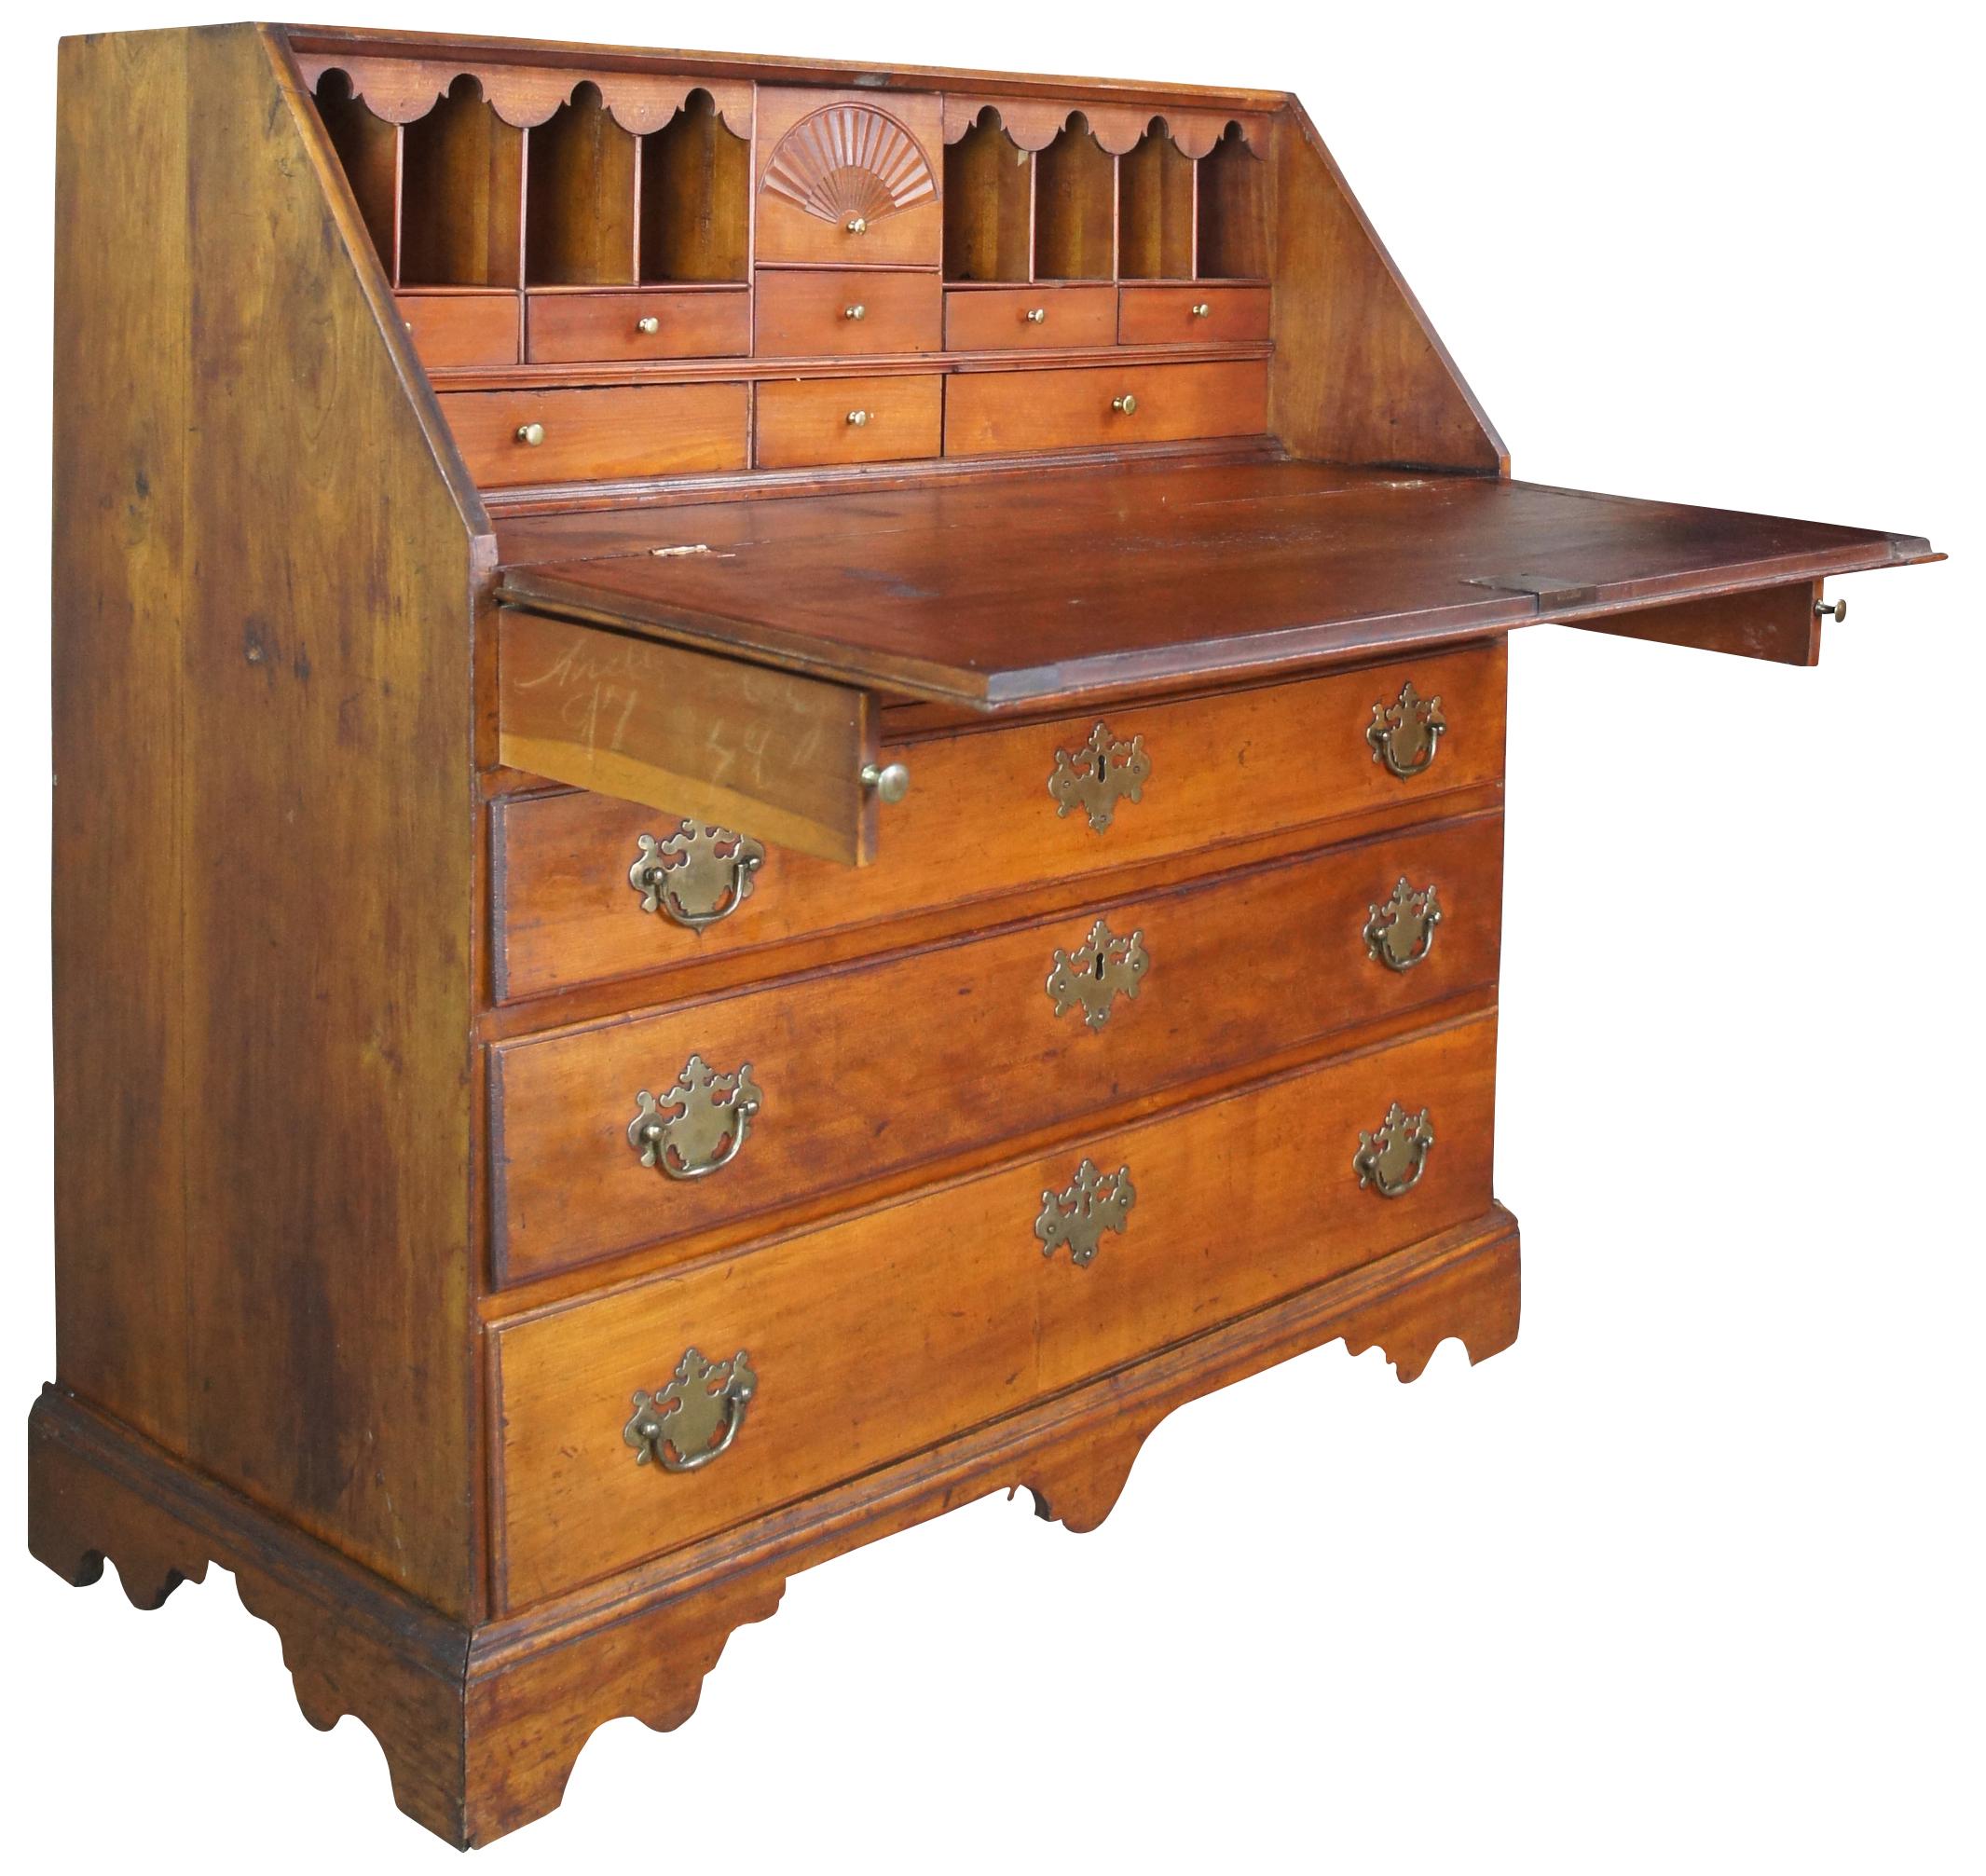 Exquisite and Rare antique American Chippendale Period secretary writing desk or Escritoire. Made from maple featuring a flip top that opens to a fan carved interior and multiple drawers for file storage. The case is constructed via hand dovetailed